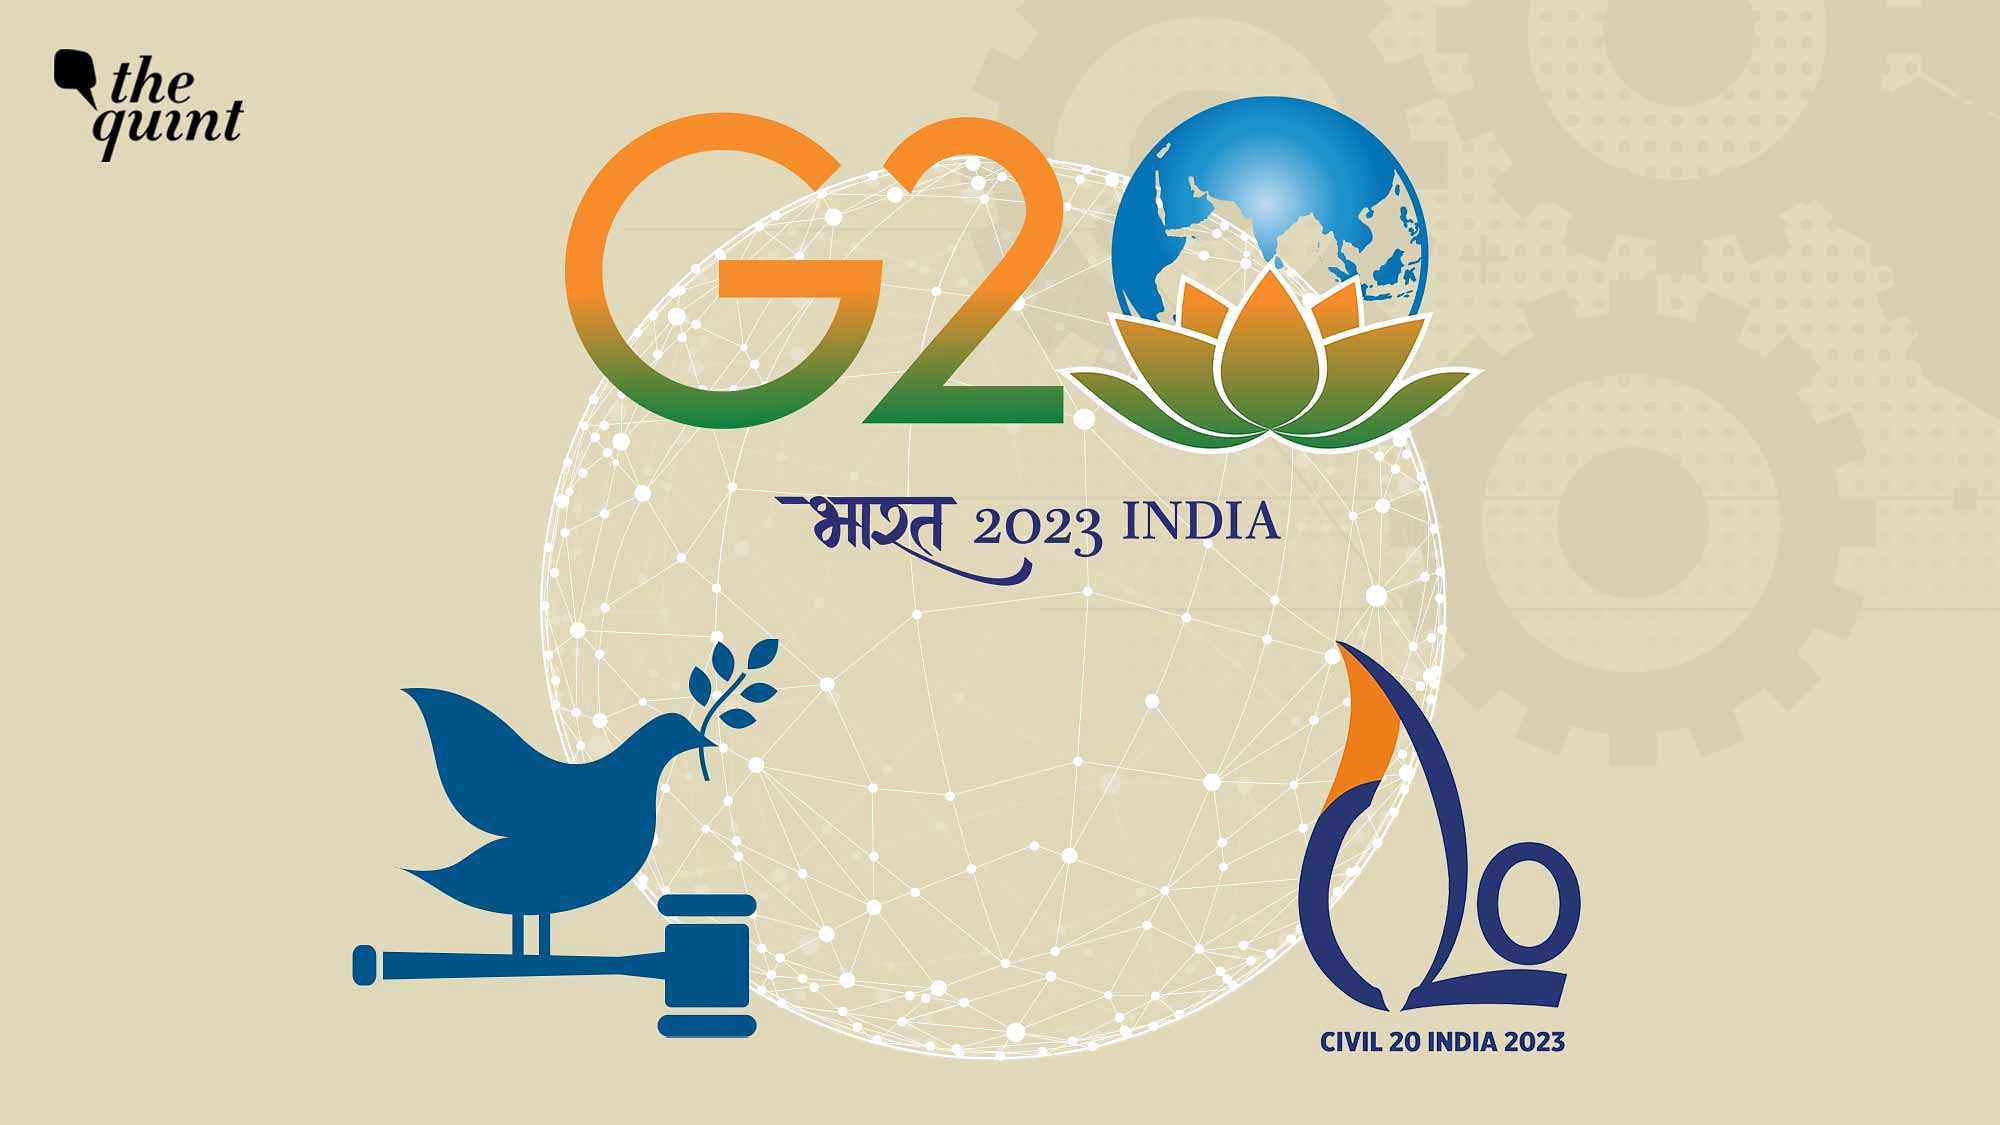 <div class="paragraphs"><p>Civil20 India 2023, a group under the G20, aims to reflect the voices of the people to political leaders. It aims at creating more peaceful, inclusive societies.&nbsp;</p></div>